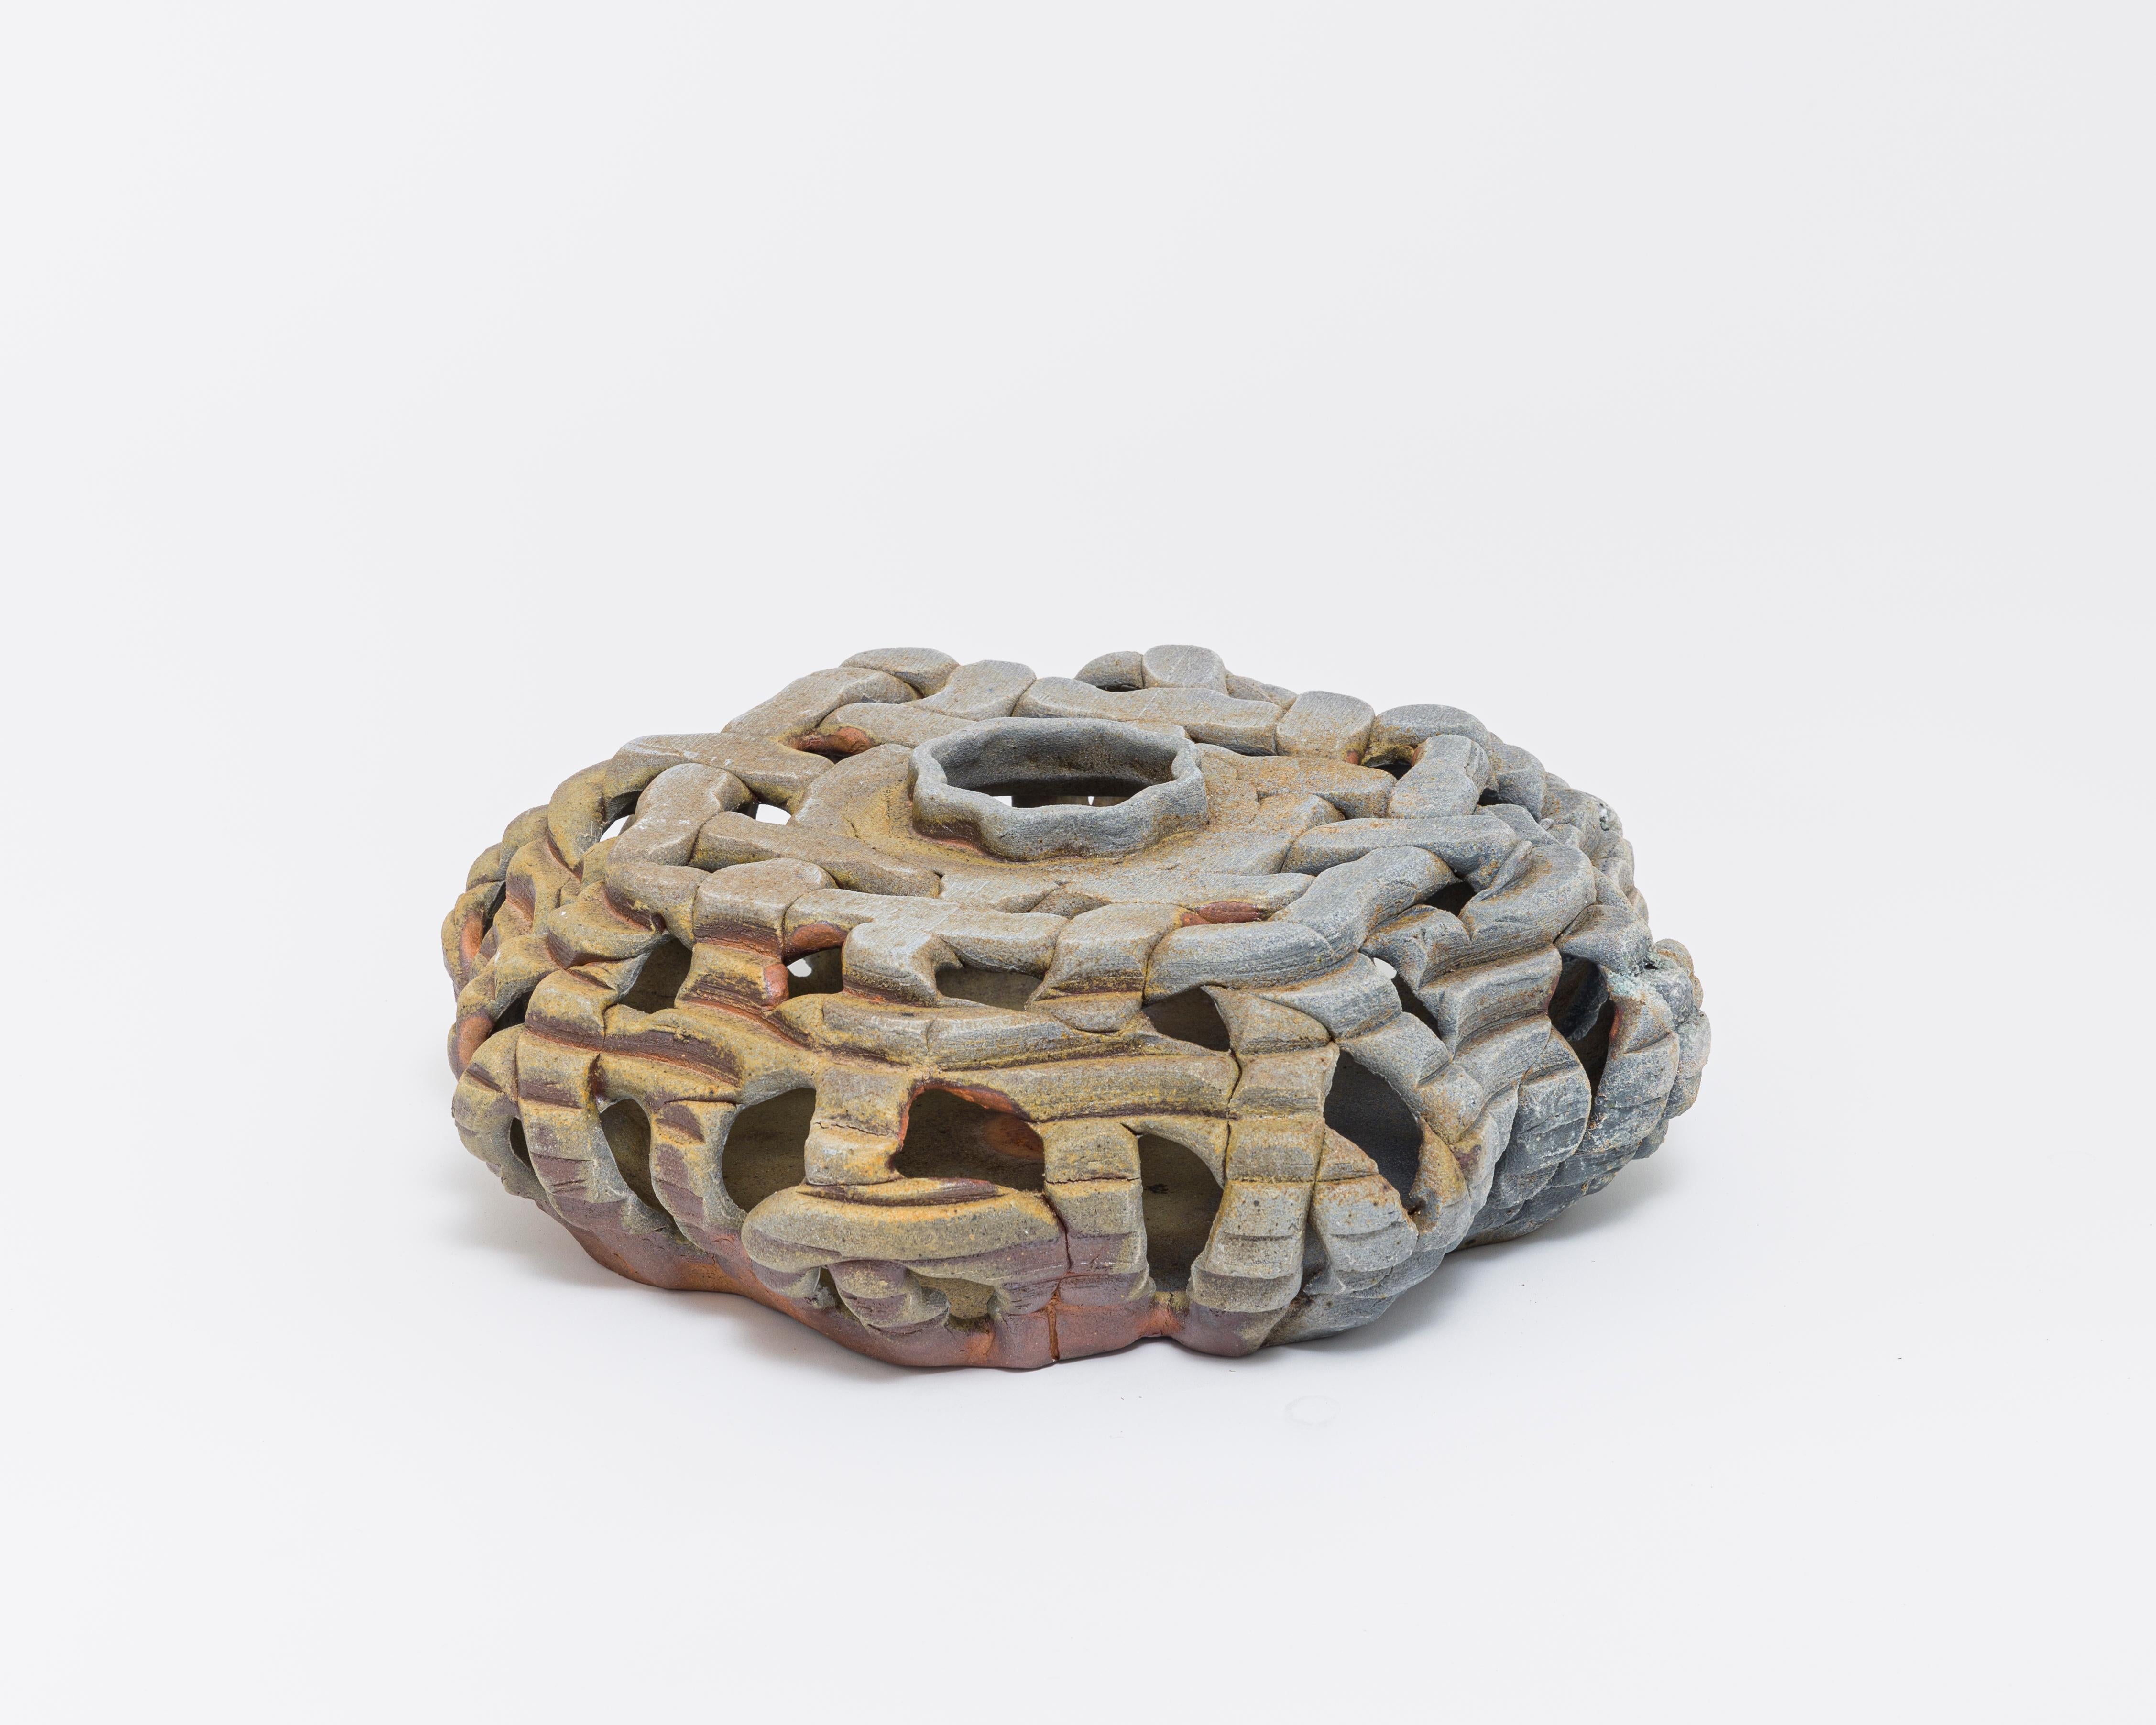 A vessel or centerpiece. Strips of clay were woven in a wooden mold to create a basket-like effect. The color comes from the natural wood-fired process.  A gorgeous piece, whose surface is full of interesting detail and variation. 

About Ellen